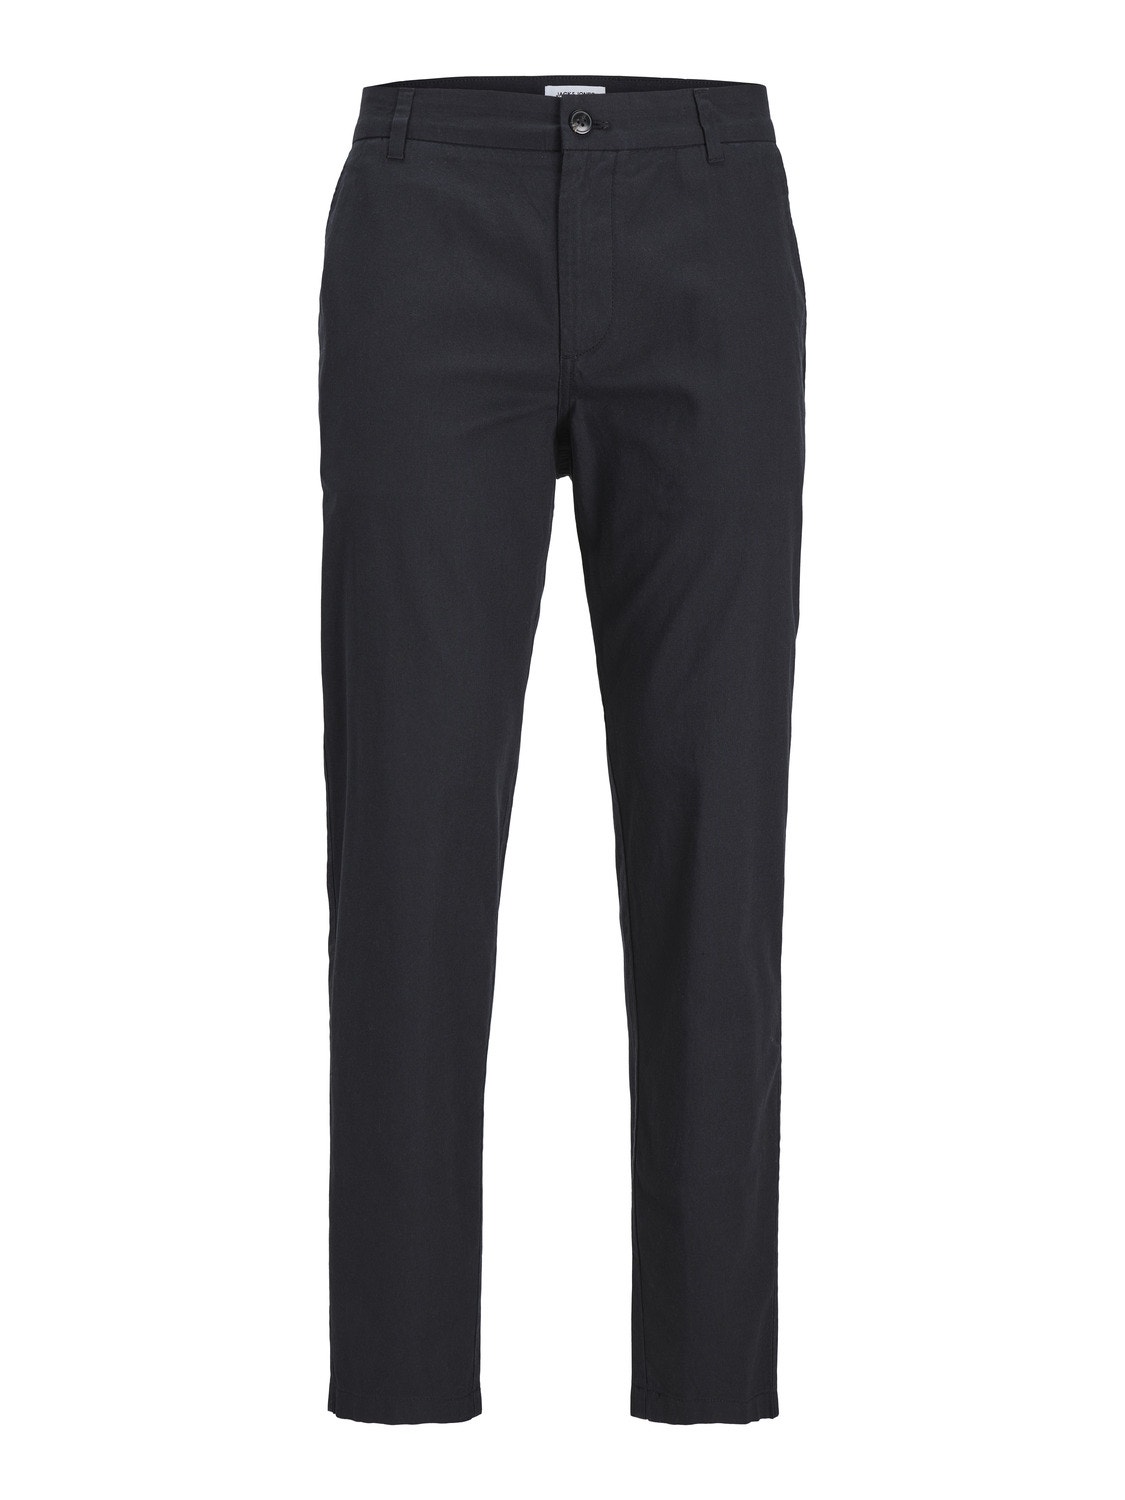 Jack & Jones Plus Size Tapered Fit Carrot fit trousers -Black - 12259702